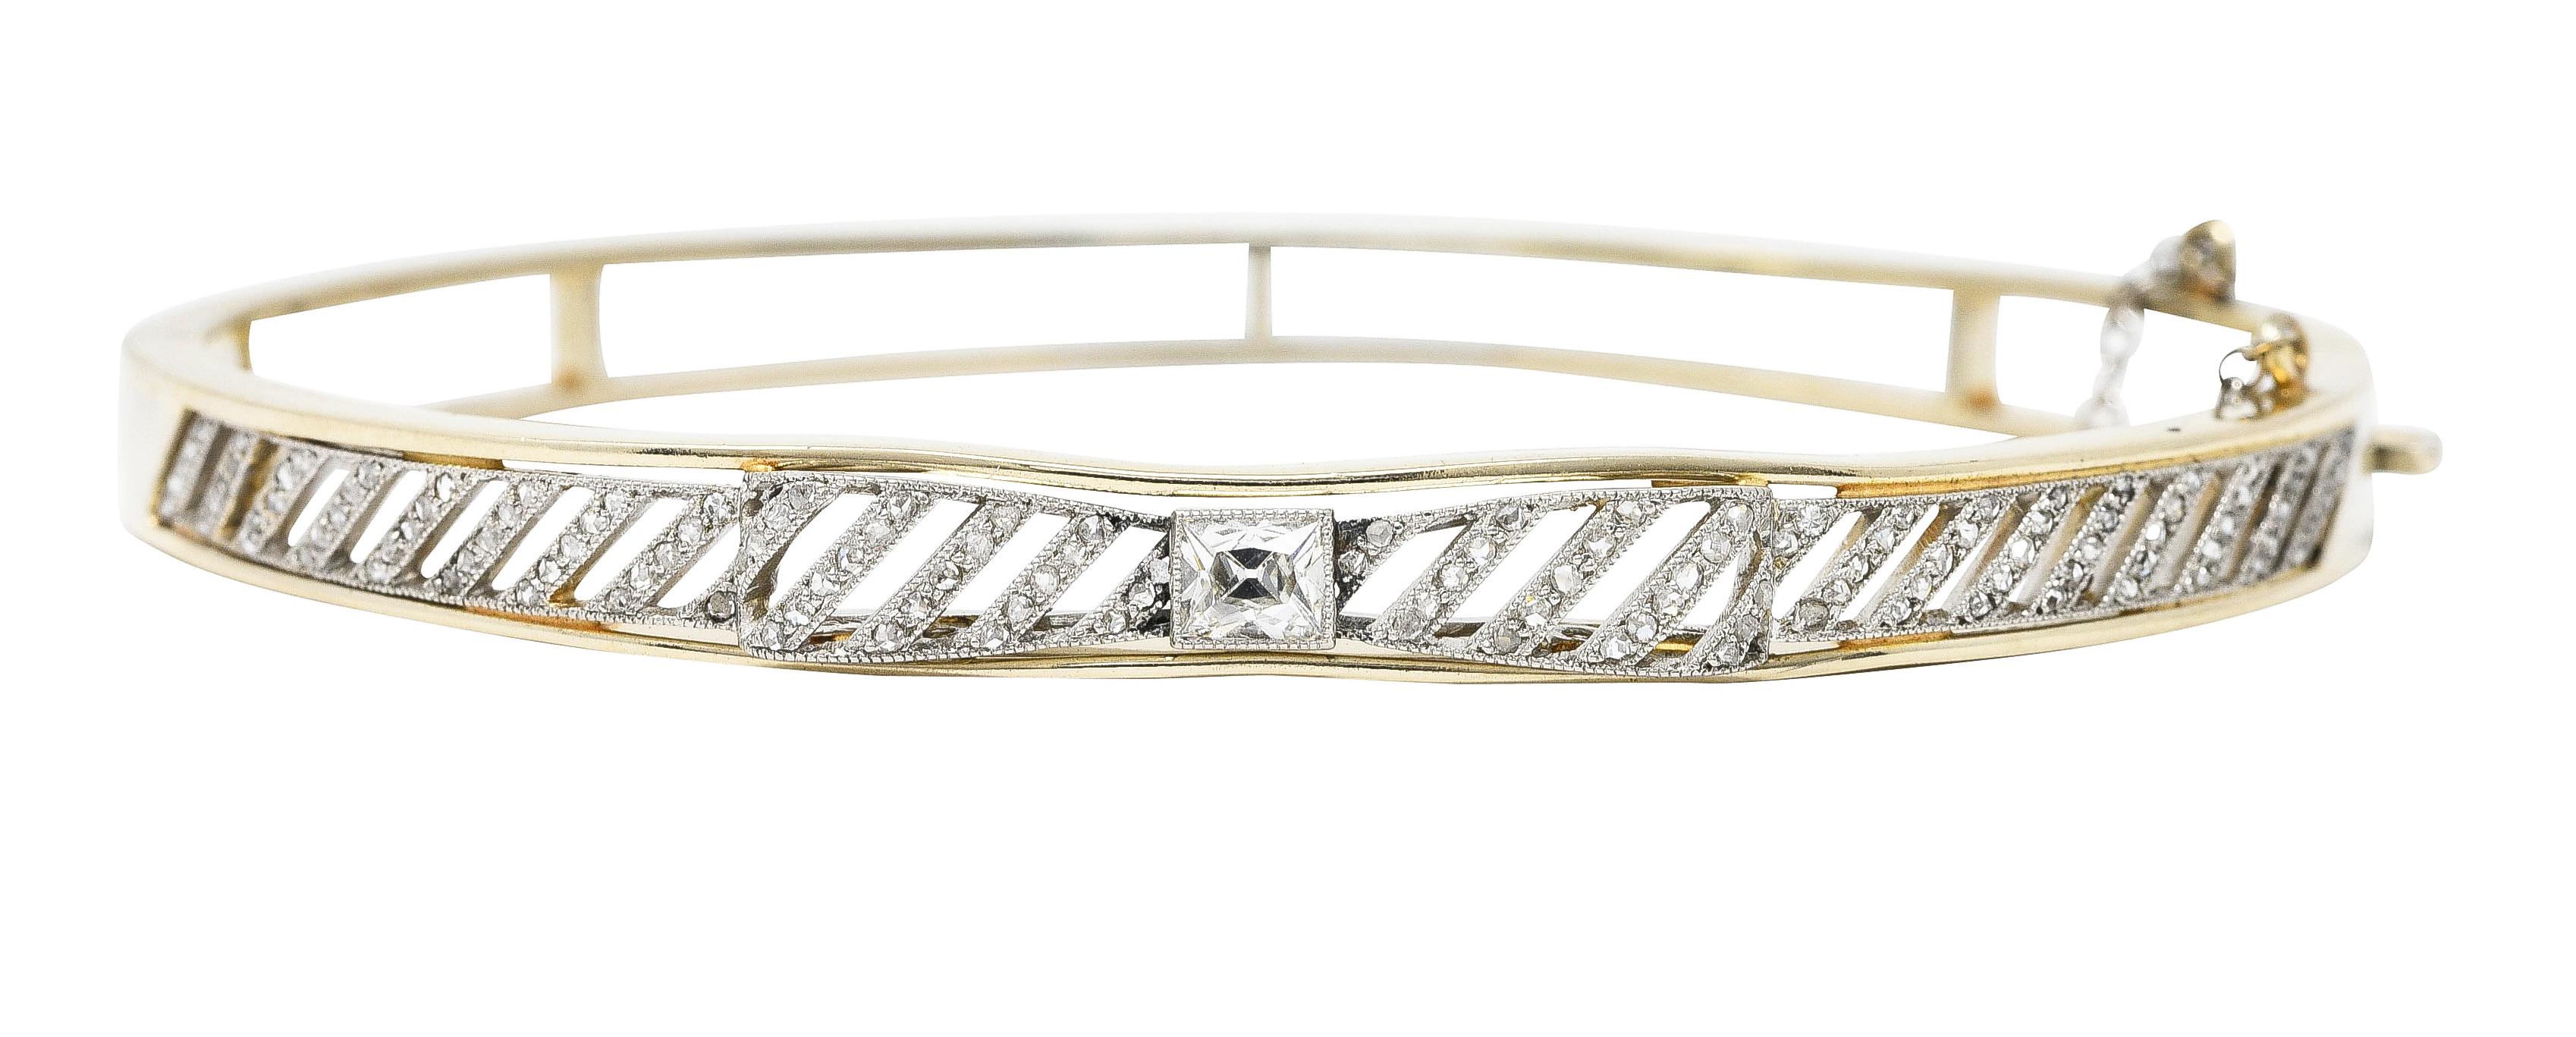 Designed as a gold bangle with a centralized dimensional platinum bow ribbon motif. Featuring a French cut diamond bezel set as the bow's knot - weighing approximately 0.40 carat. H color with VS clarity - flanked by pierced rows of rose cut